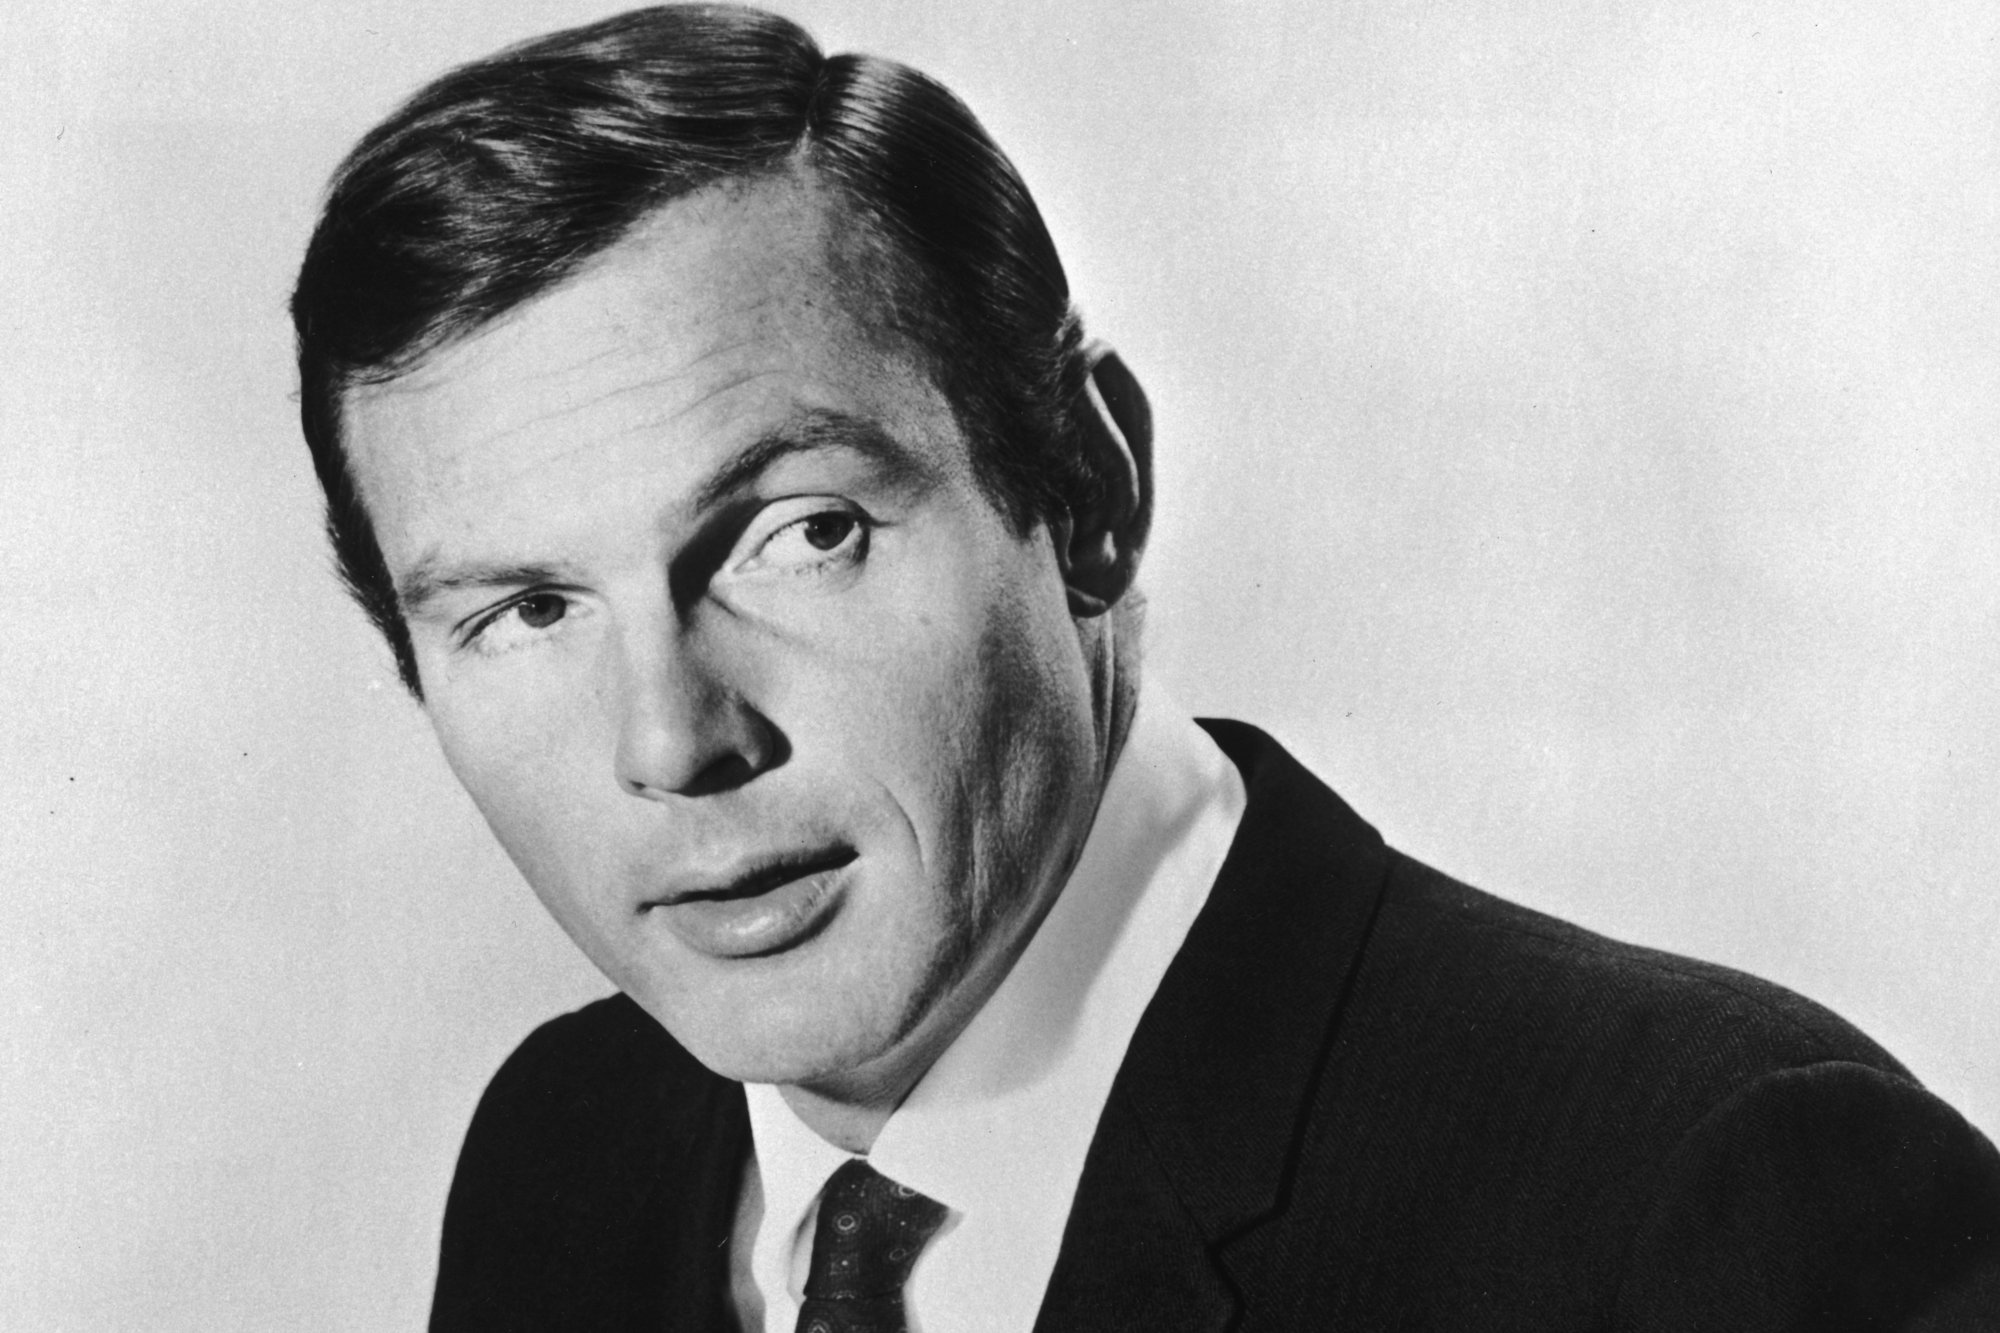 'Gunsmoke' guest star Adam West in a promo image wearing a suit and tie looking off to one side